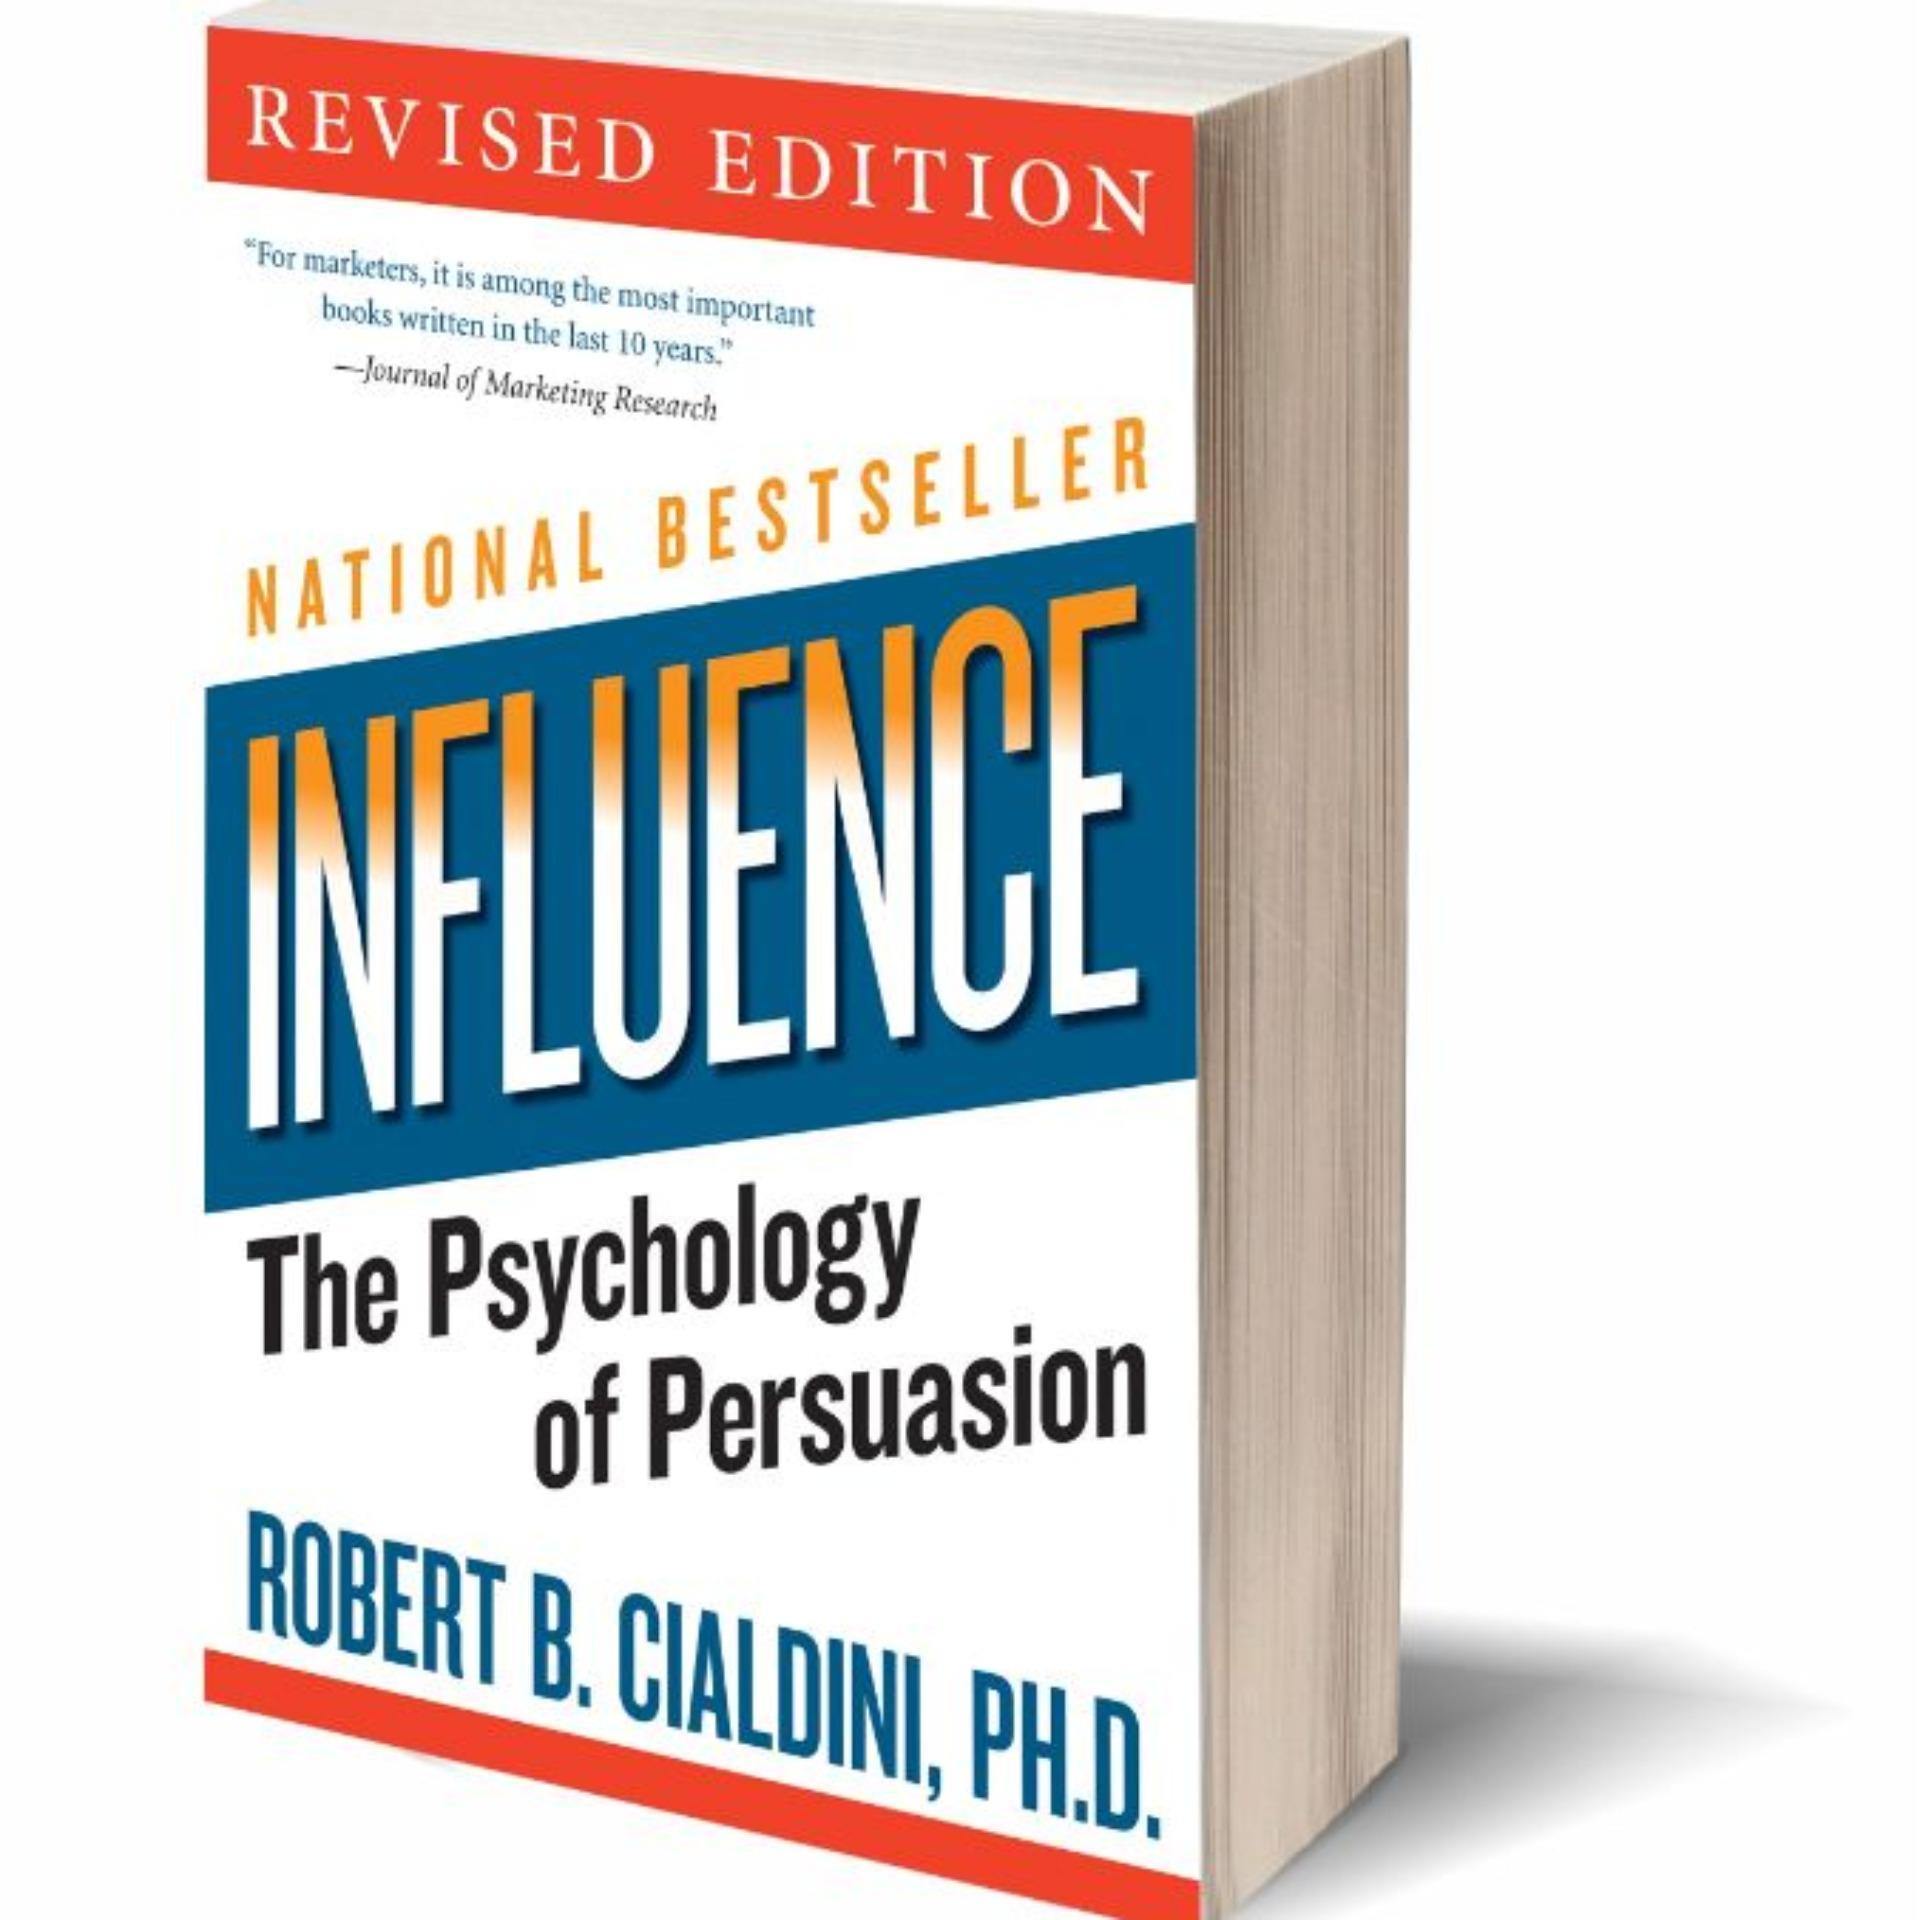 Influence: The Psychology of Persuasion by Robert Cialdini is the best book  ever written on Influence.